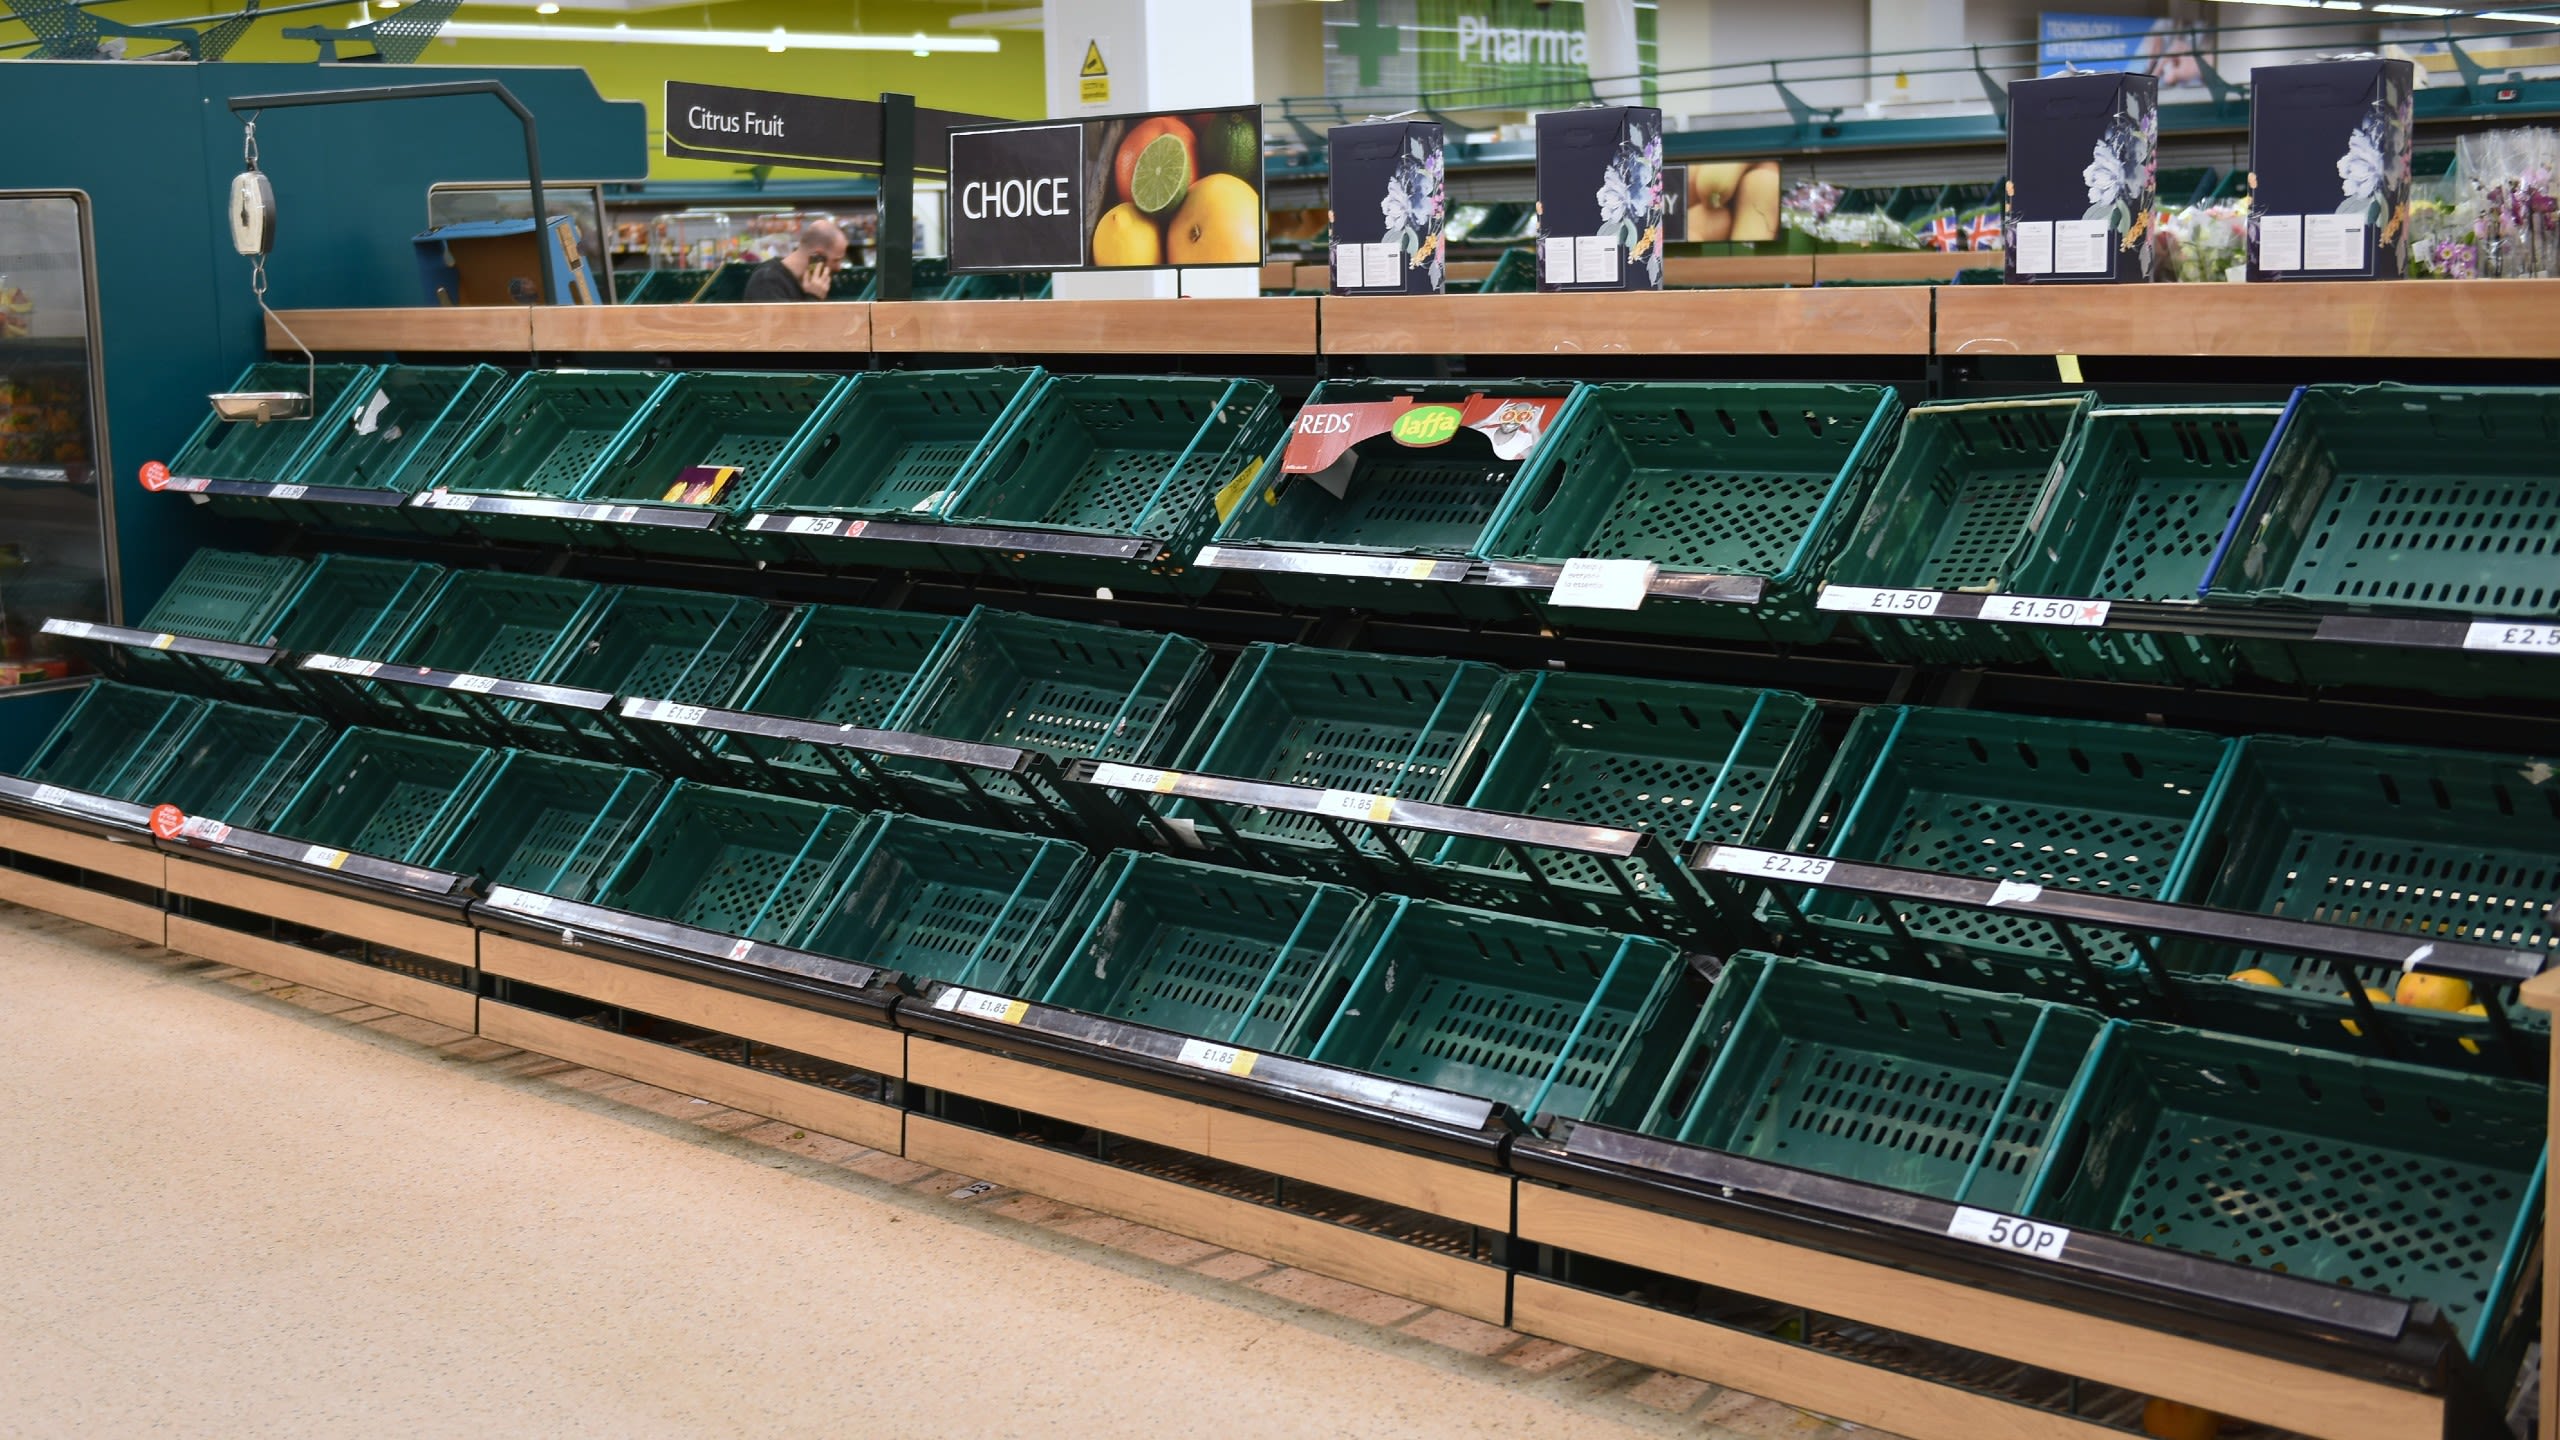 An image of an empty fruit and vegetable section of a UK supermarket during the COVID-19 pandemic.